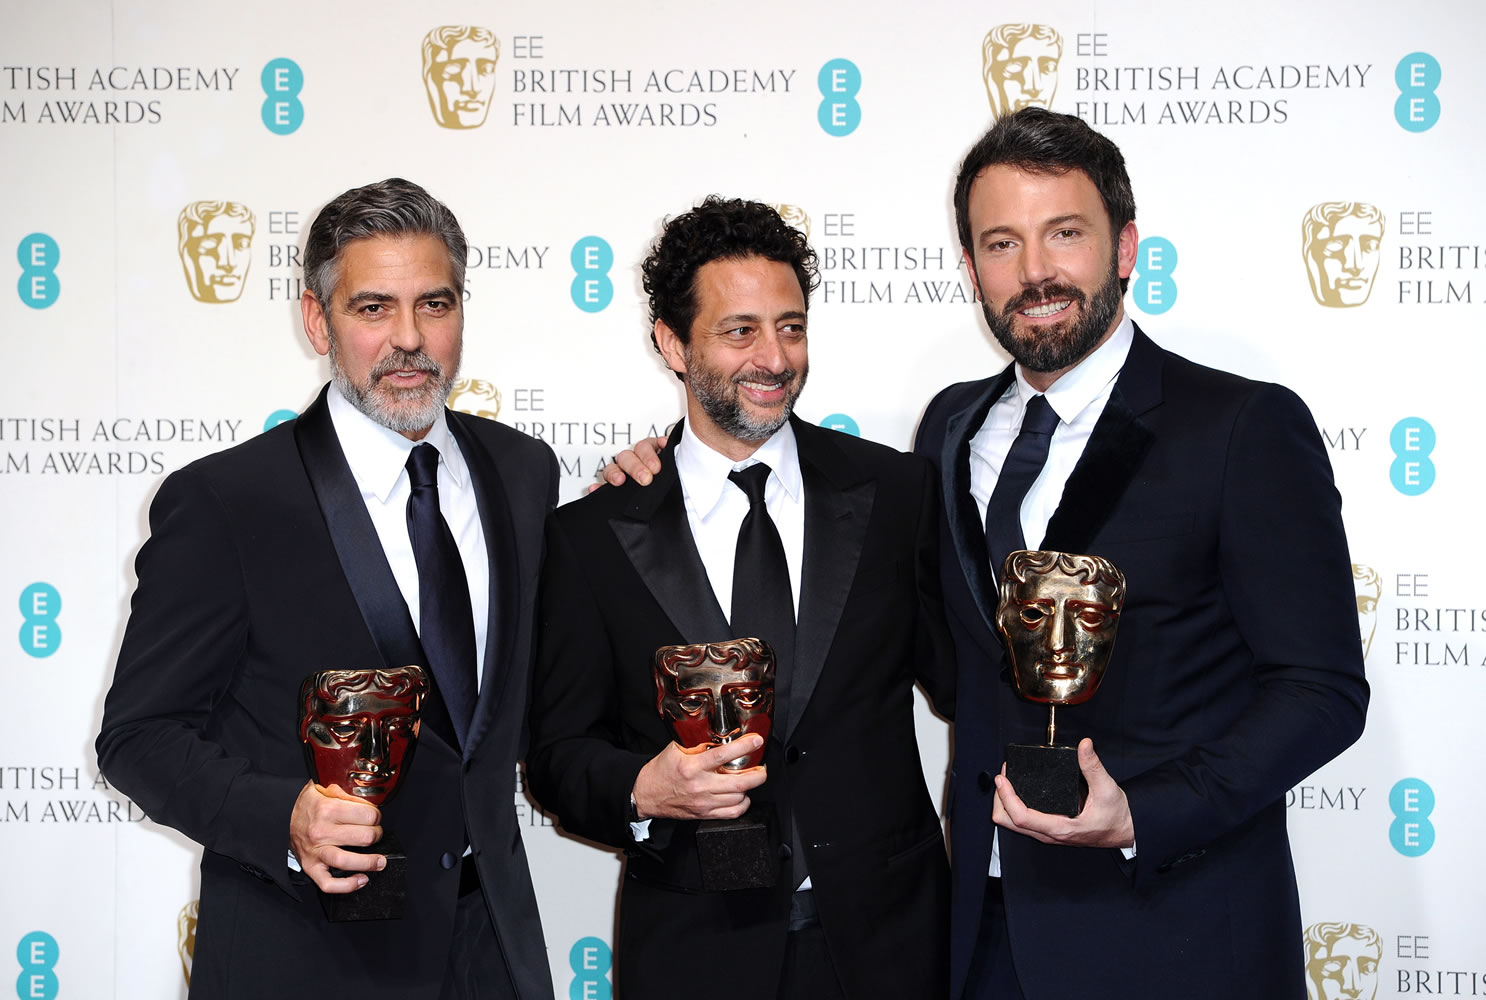 Actors George Clooney, Grant Heslov, and Ben Affleck pose with the award for Best Film, for &quot;Argo,&quot; backstage at the BAFTA Film Awards at the Royal Opera House on Sunday, in London. The film was produced by Clooney and Heslov and was directed by Affleck.